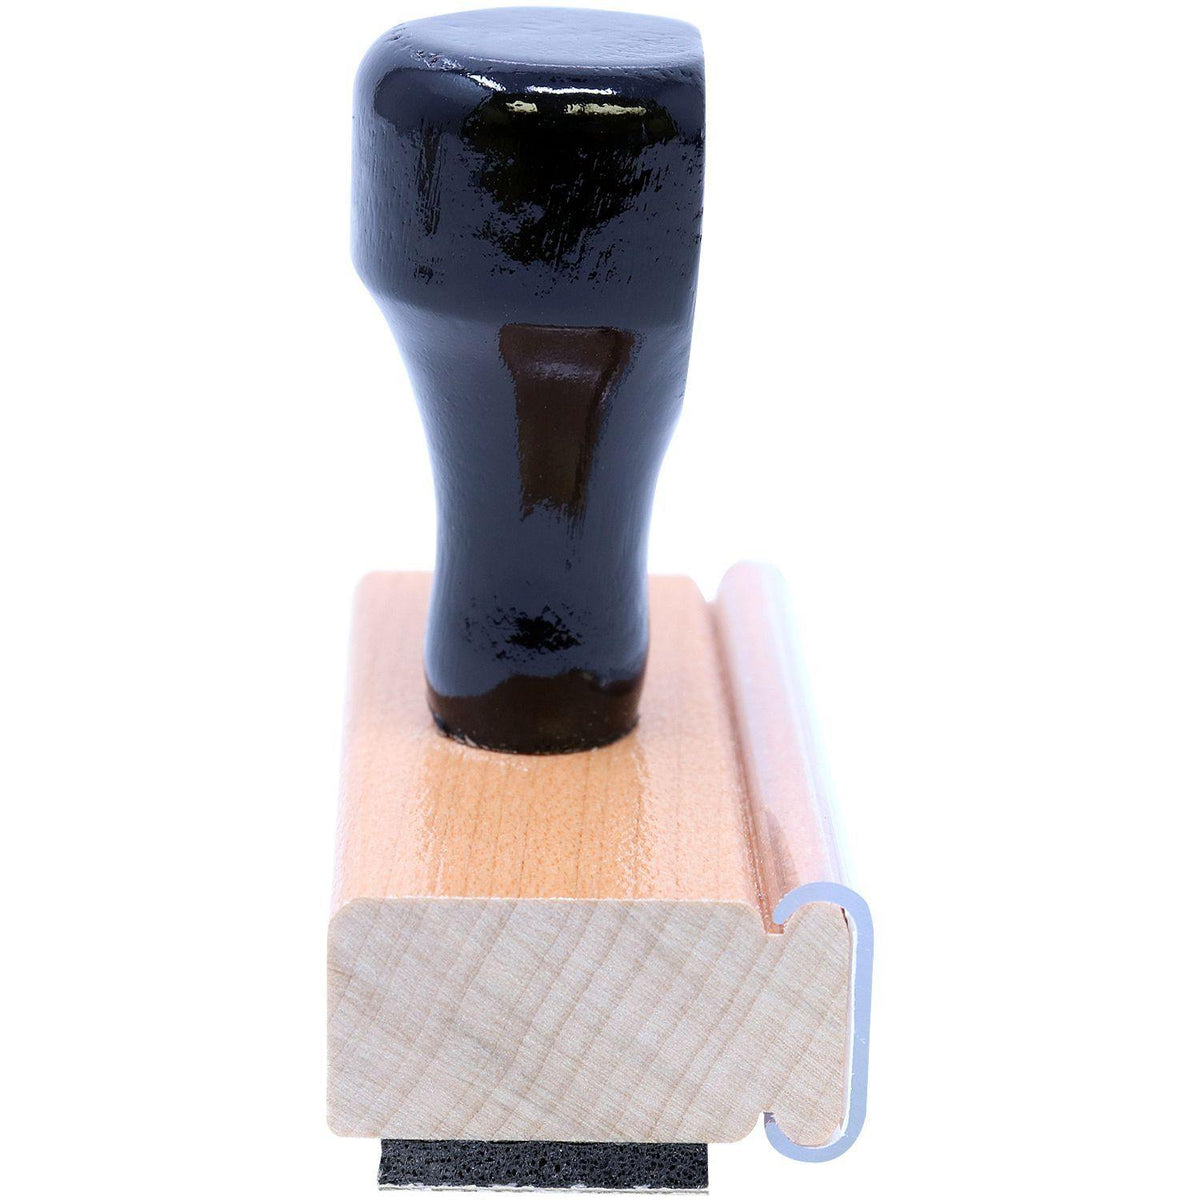 Narrow Font Cancelled Rubber Stamp - Engineer Seal Stamps - Brand_Acorn, Impression Size_Small, Stamp Type_Regular Stamp, Type of Use_Business, Type of Use_Finance, Type of Use_Office, Type of Use_Professional